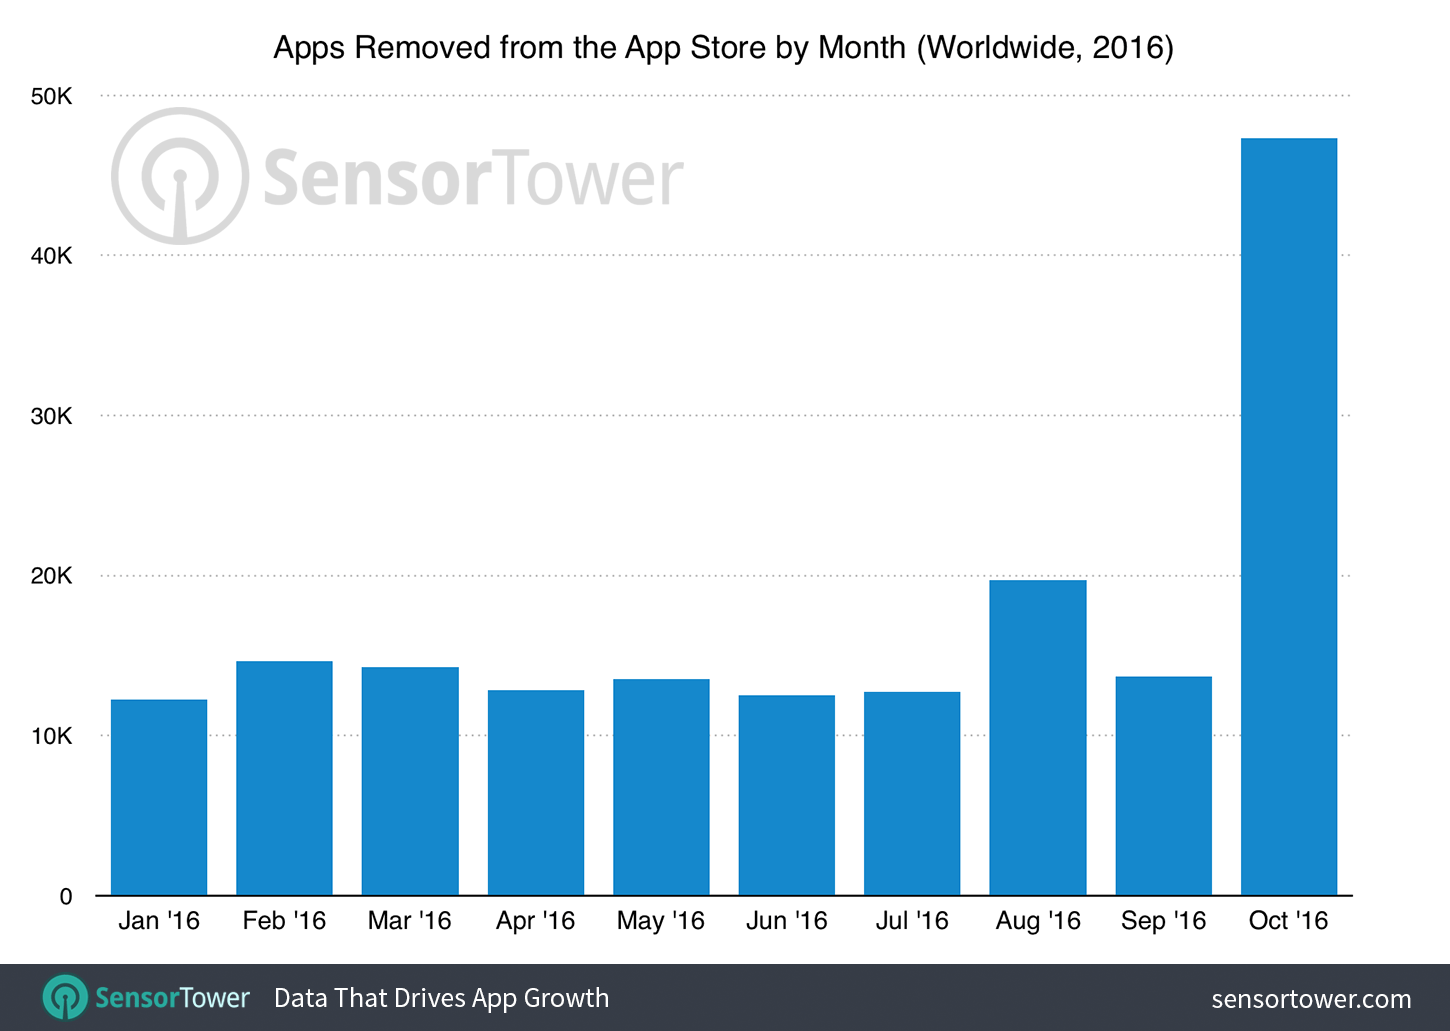 Chart of Apps Removed From The App Store By Month From January To October 2016